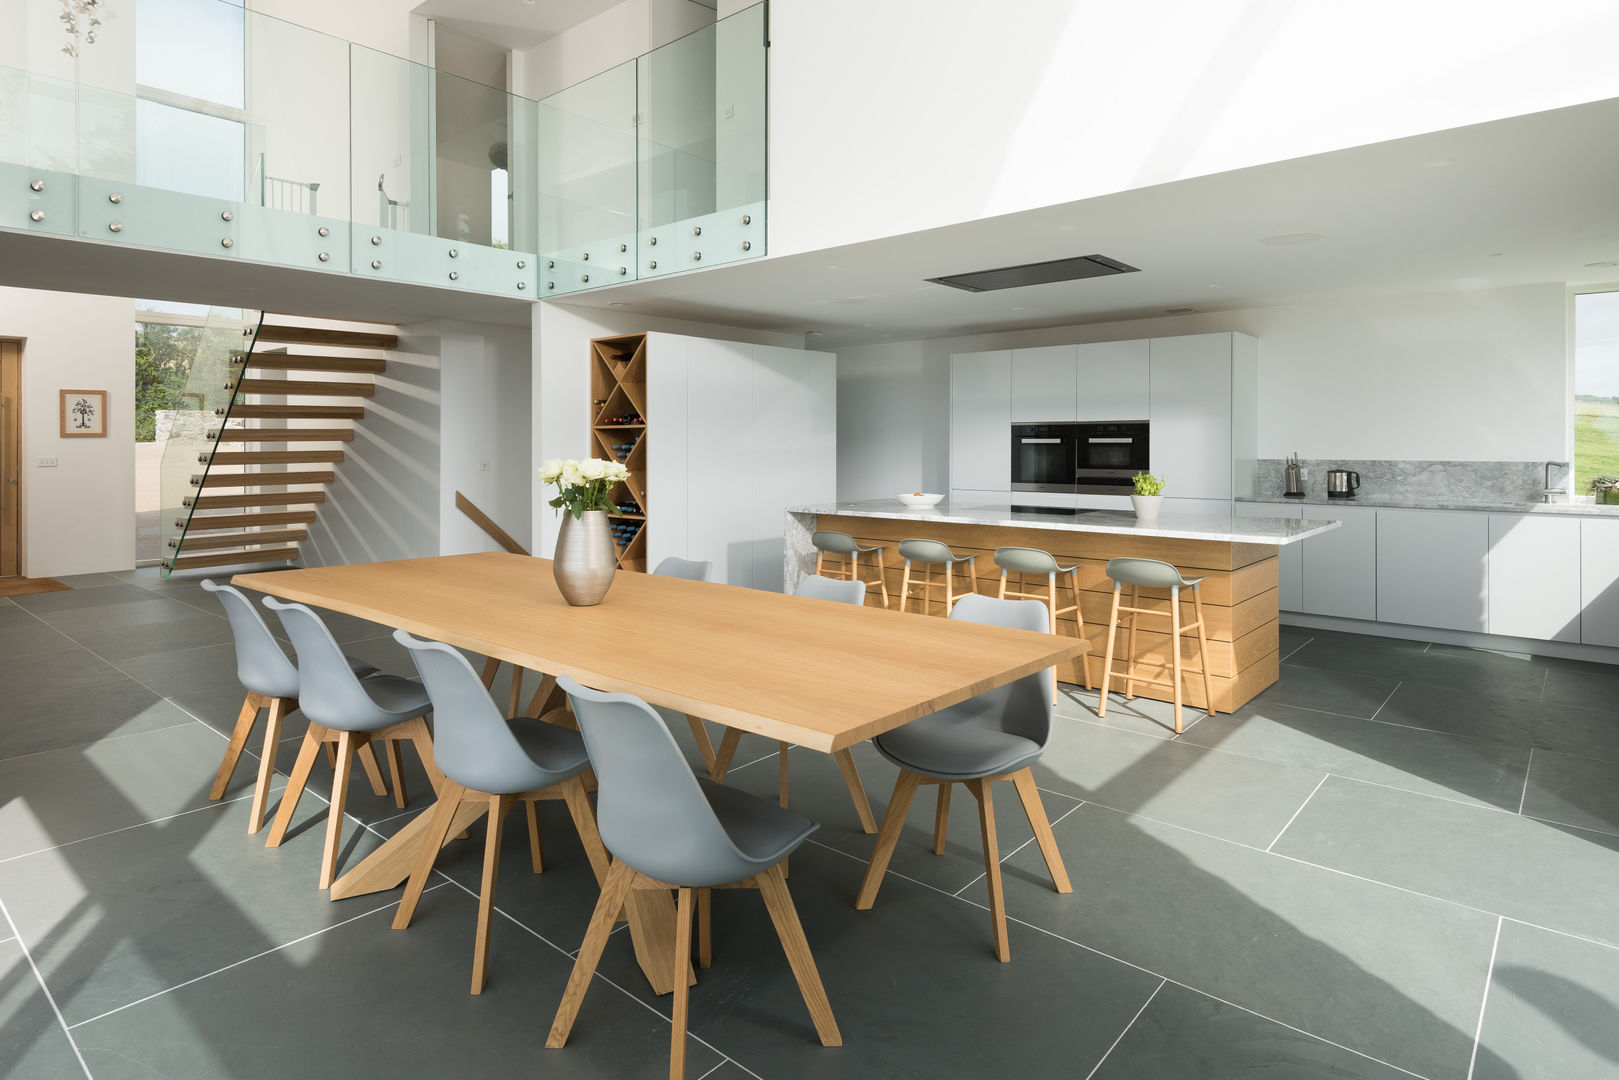 Contemporary Replacement Dwelling, Cubert, Laurence Associates Laurence Associates Salle à manger moderne kitchen,dining room,open plan,open space kitchen,dining table,dining chairs,mezzanine,stairs,white kitchen,flooring,modern,contemporary